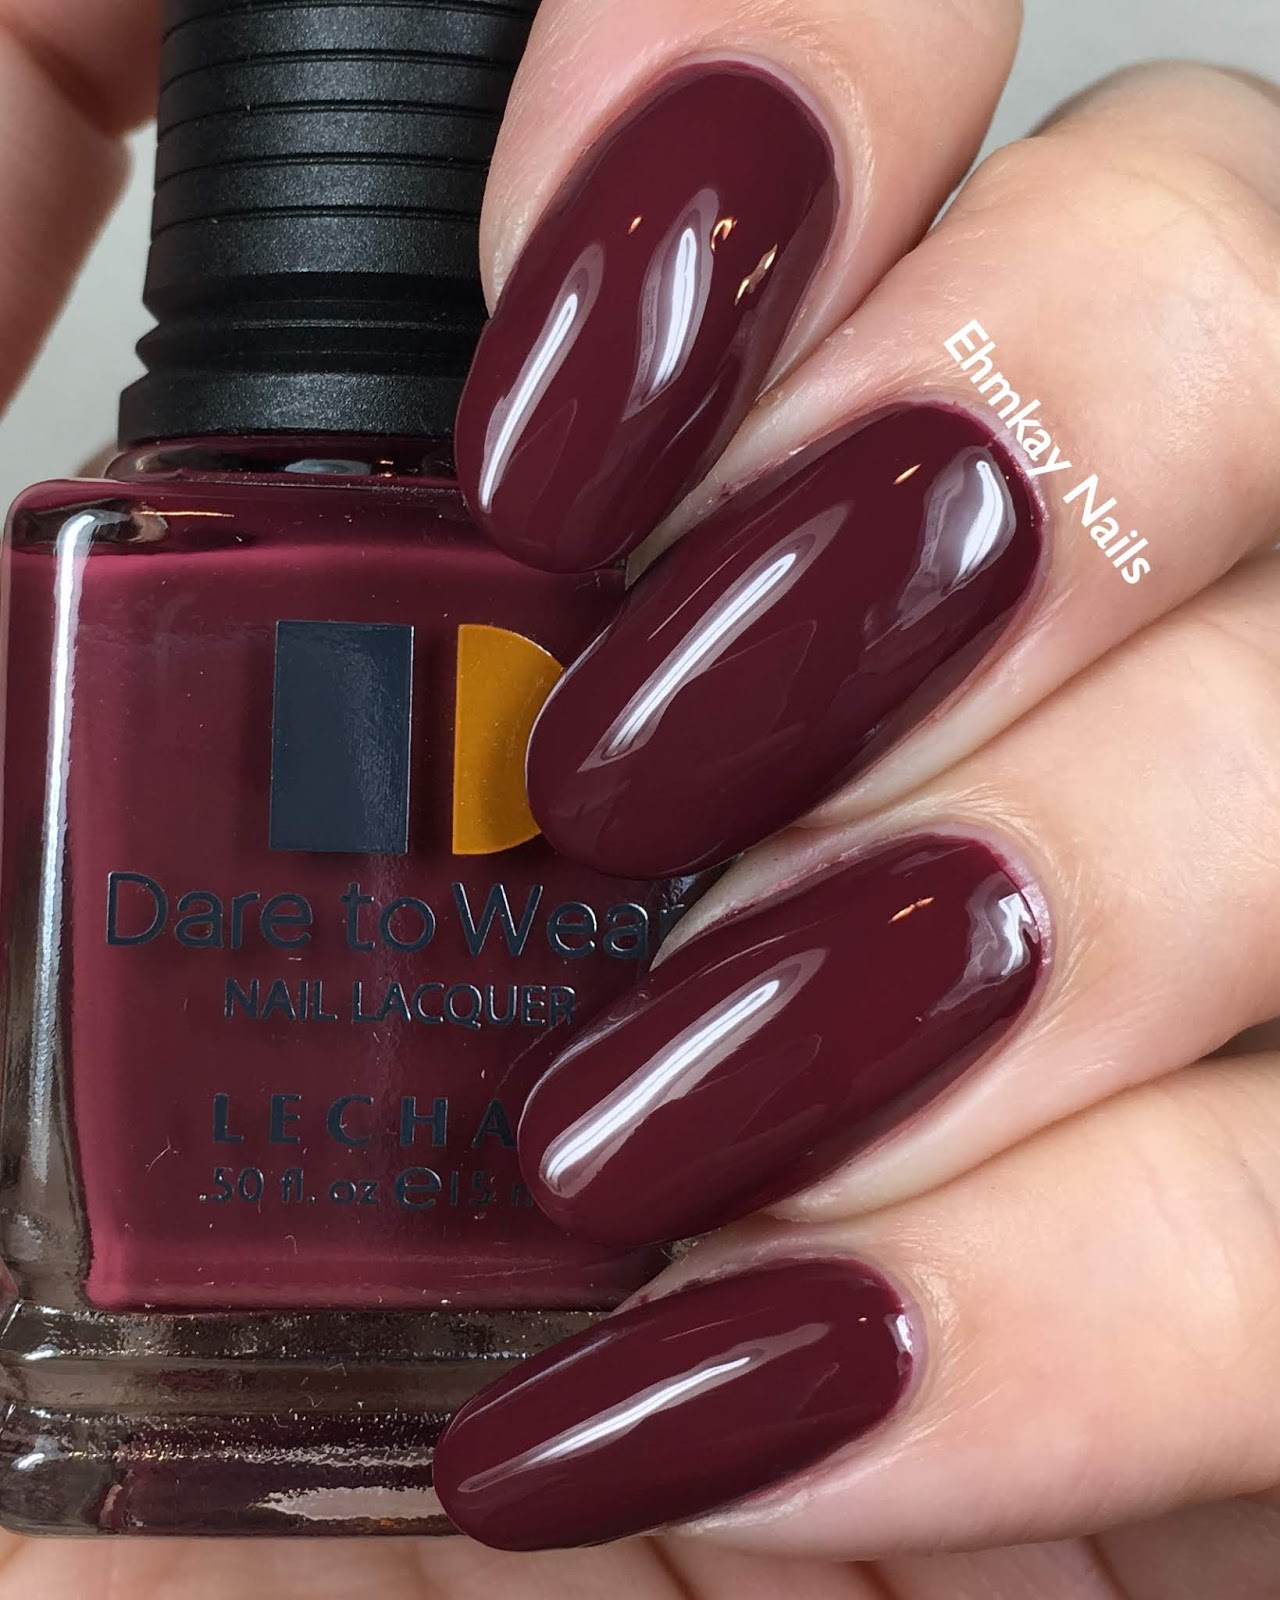 ehmkay nails: Lechat Dare to Wear Color Me Autumn